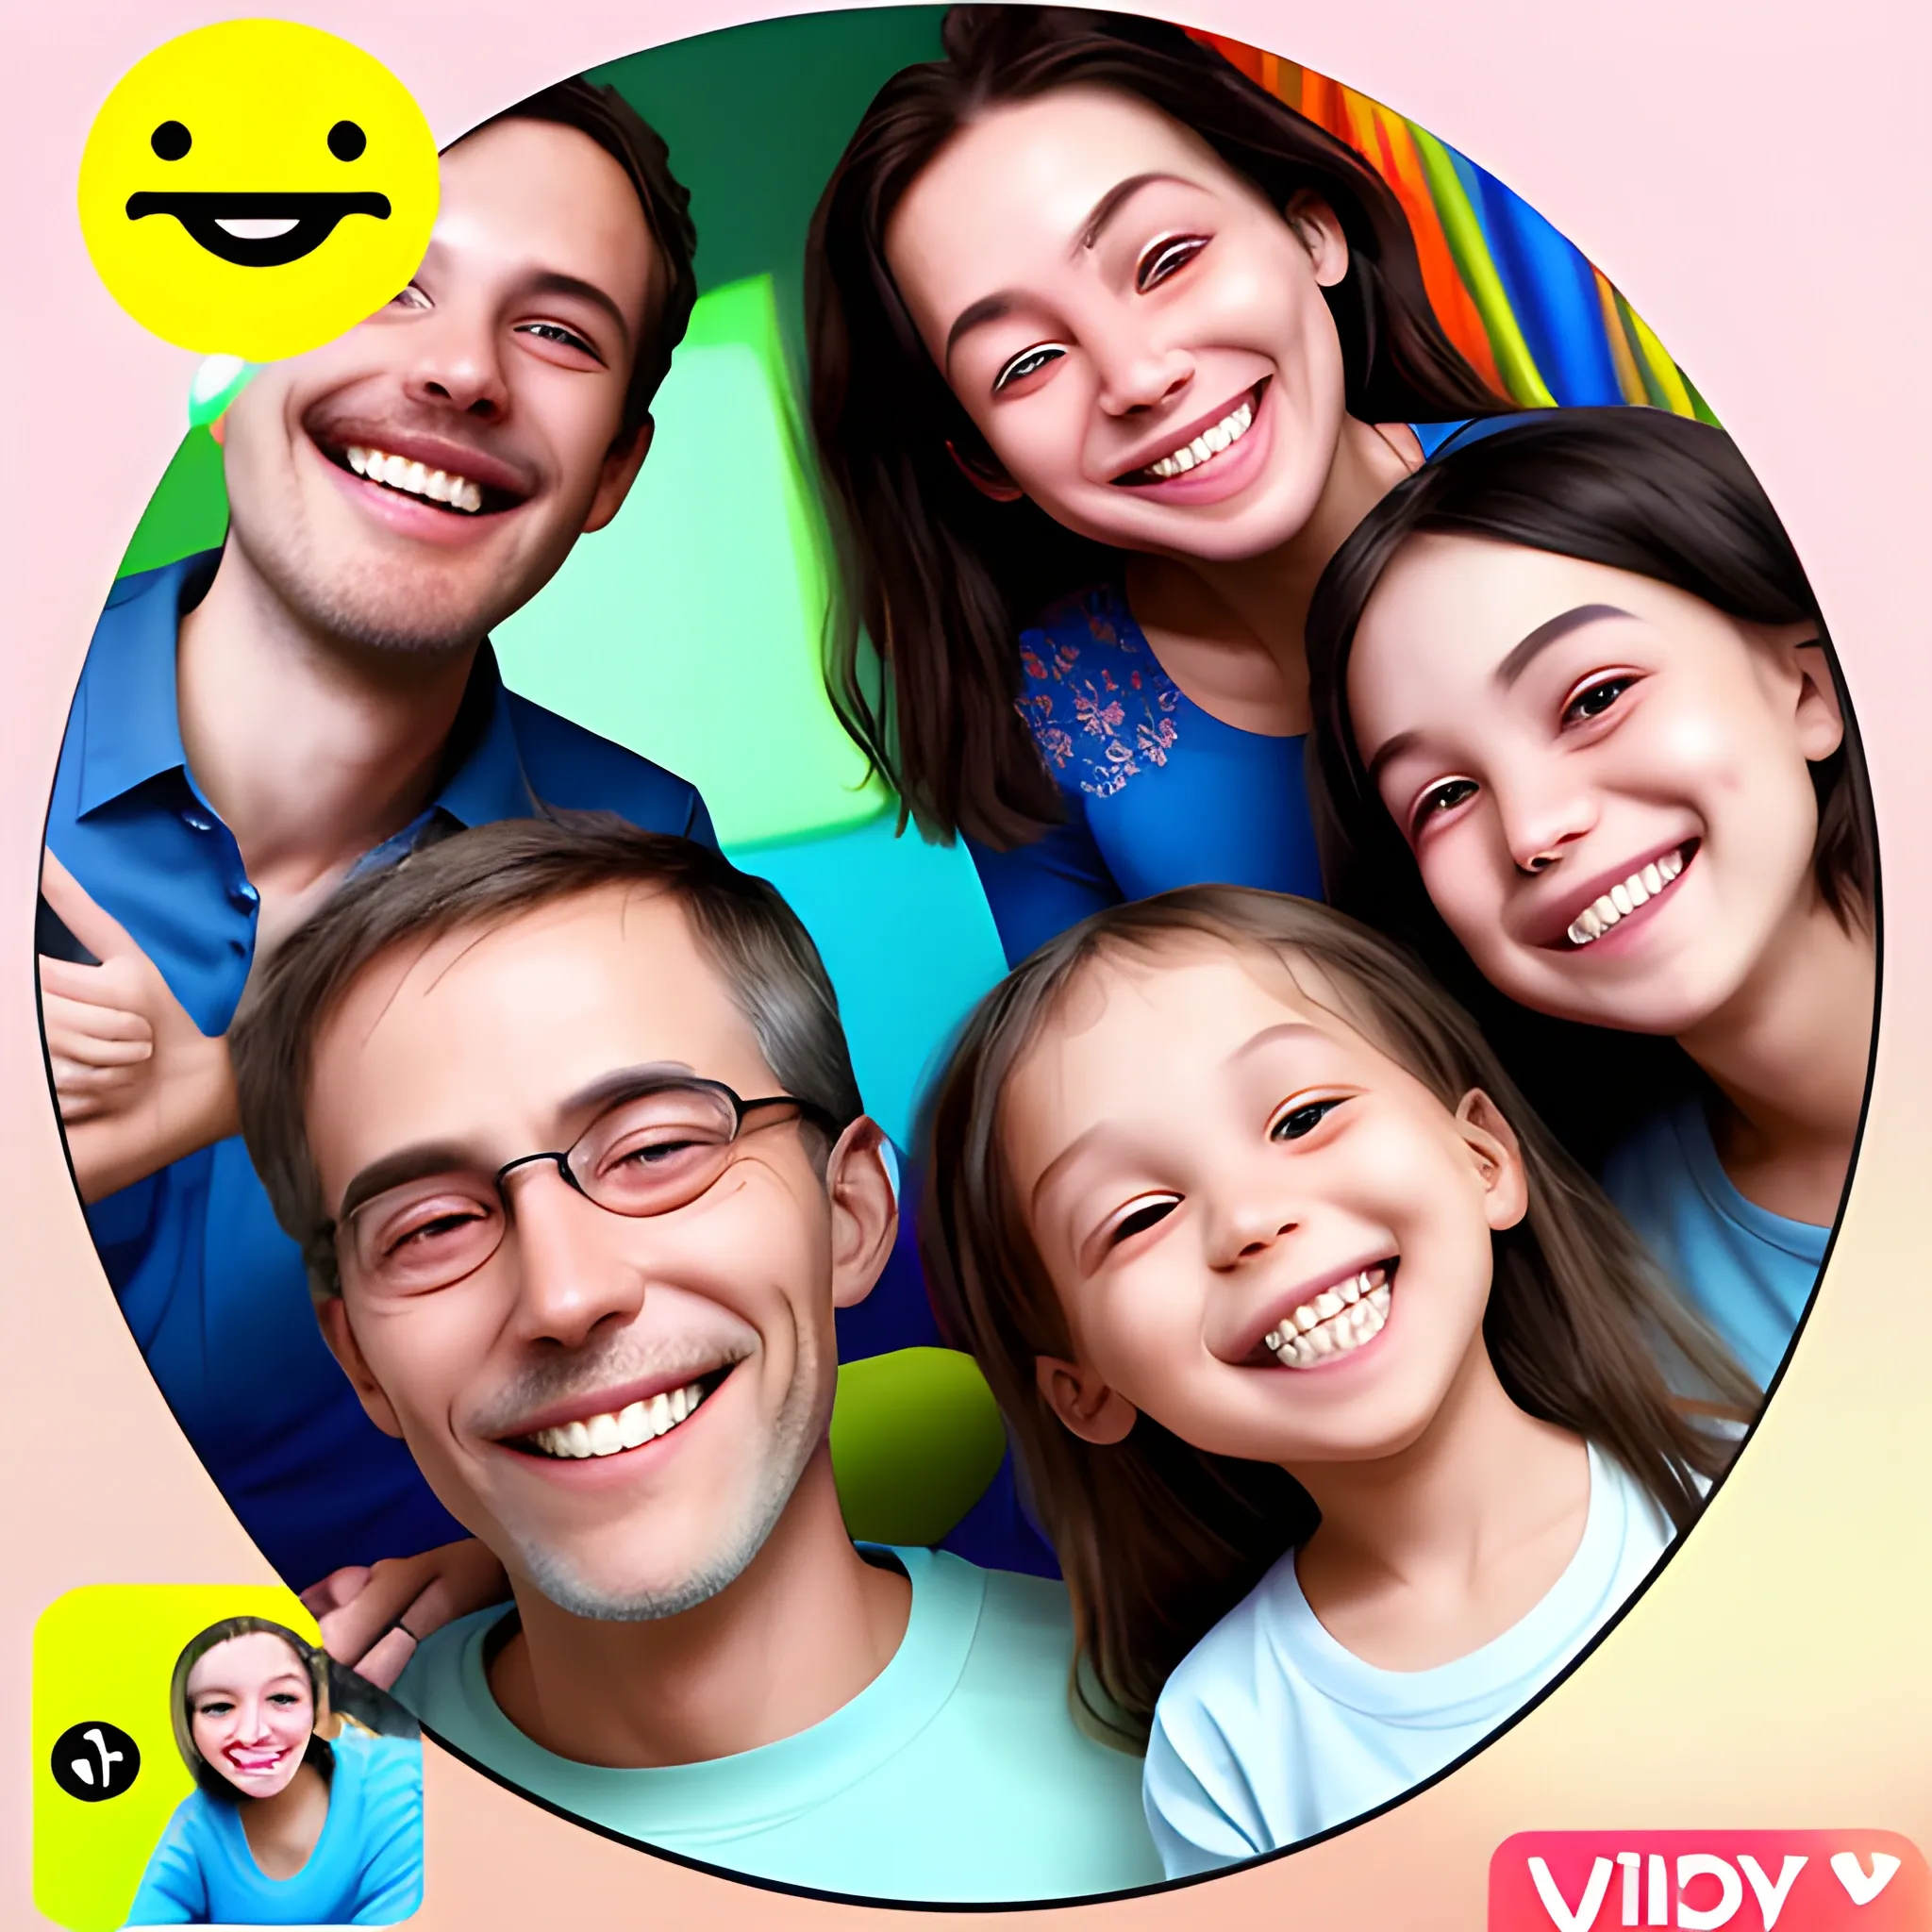 , Trippy, video call family of 4. Smiling brightly